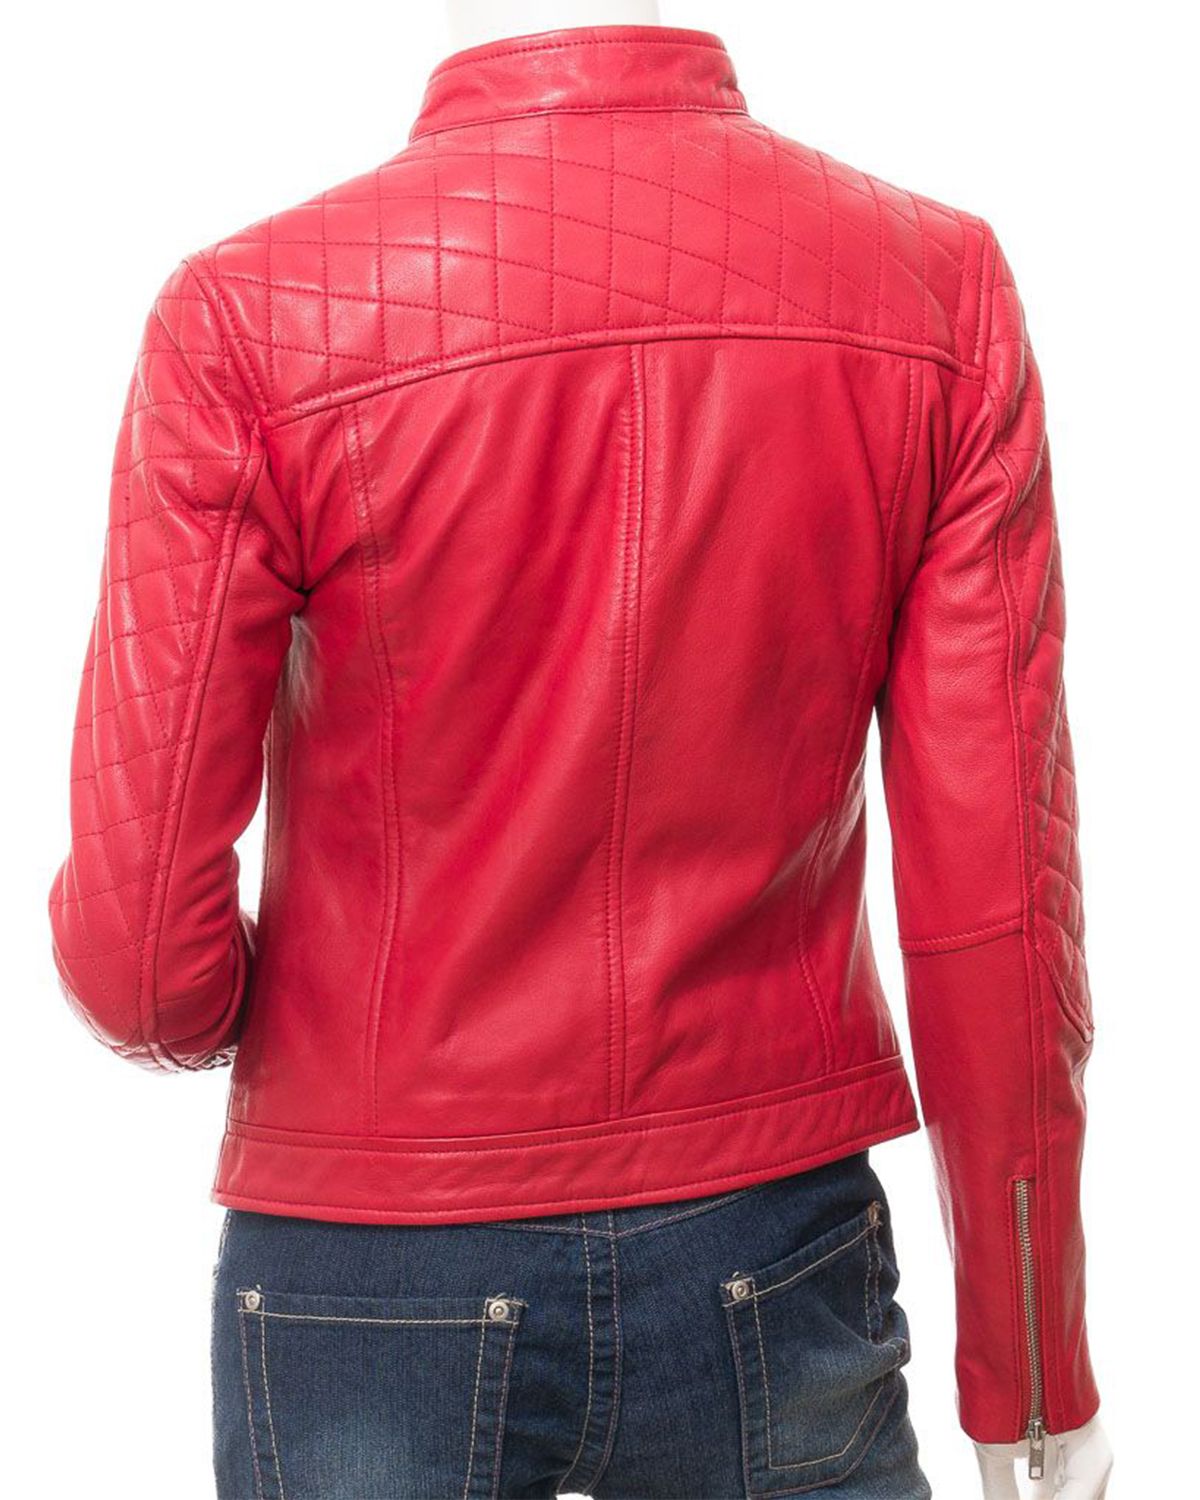 Women's Quilted Shoulder Stylish Biker Cafe Racer Style Real Leather Jacket